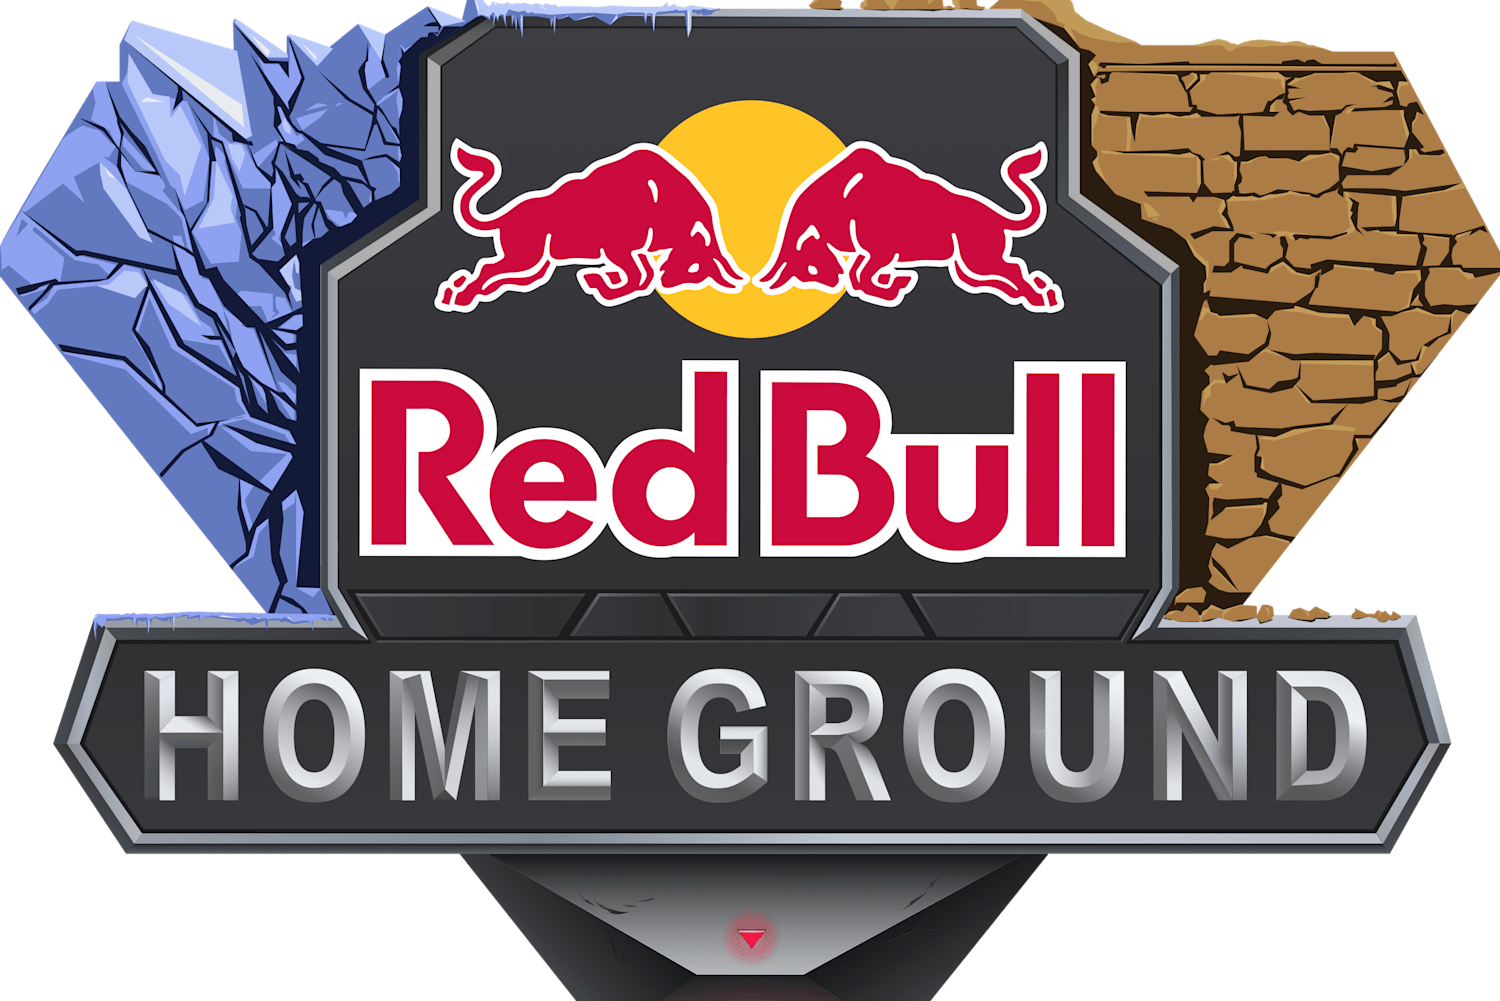 Home Ground by Red Bull